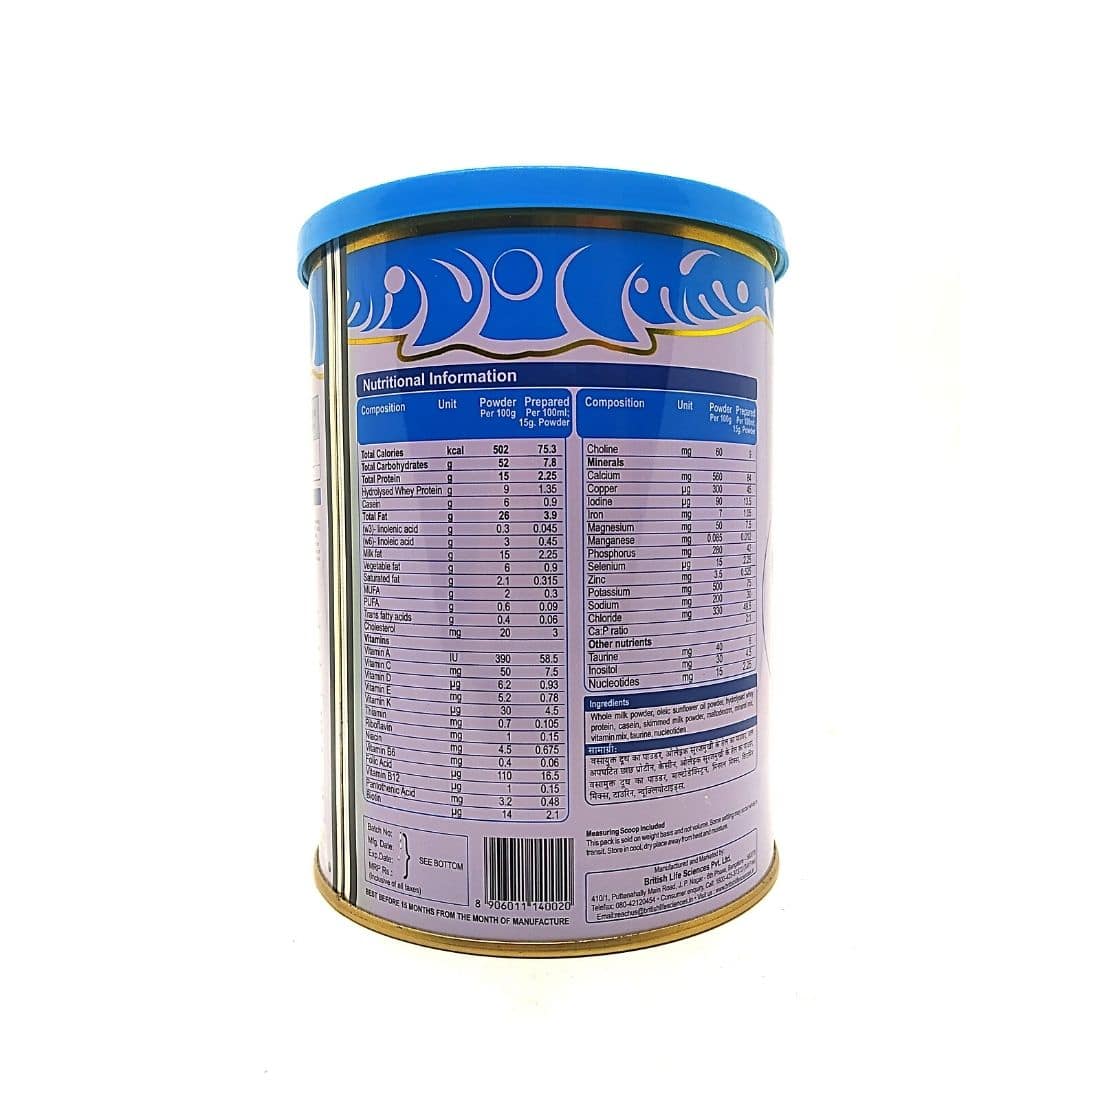 Nutrition Baby’s Food MMS 2 Infant Formula Powder is an infant formula specially designed